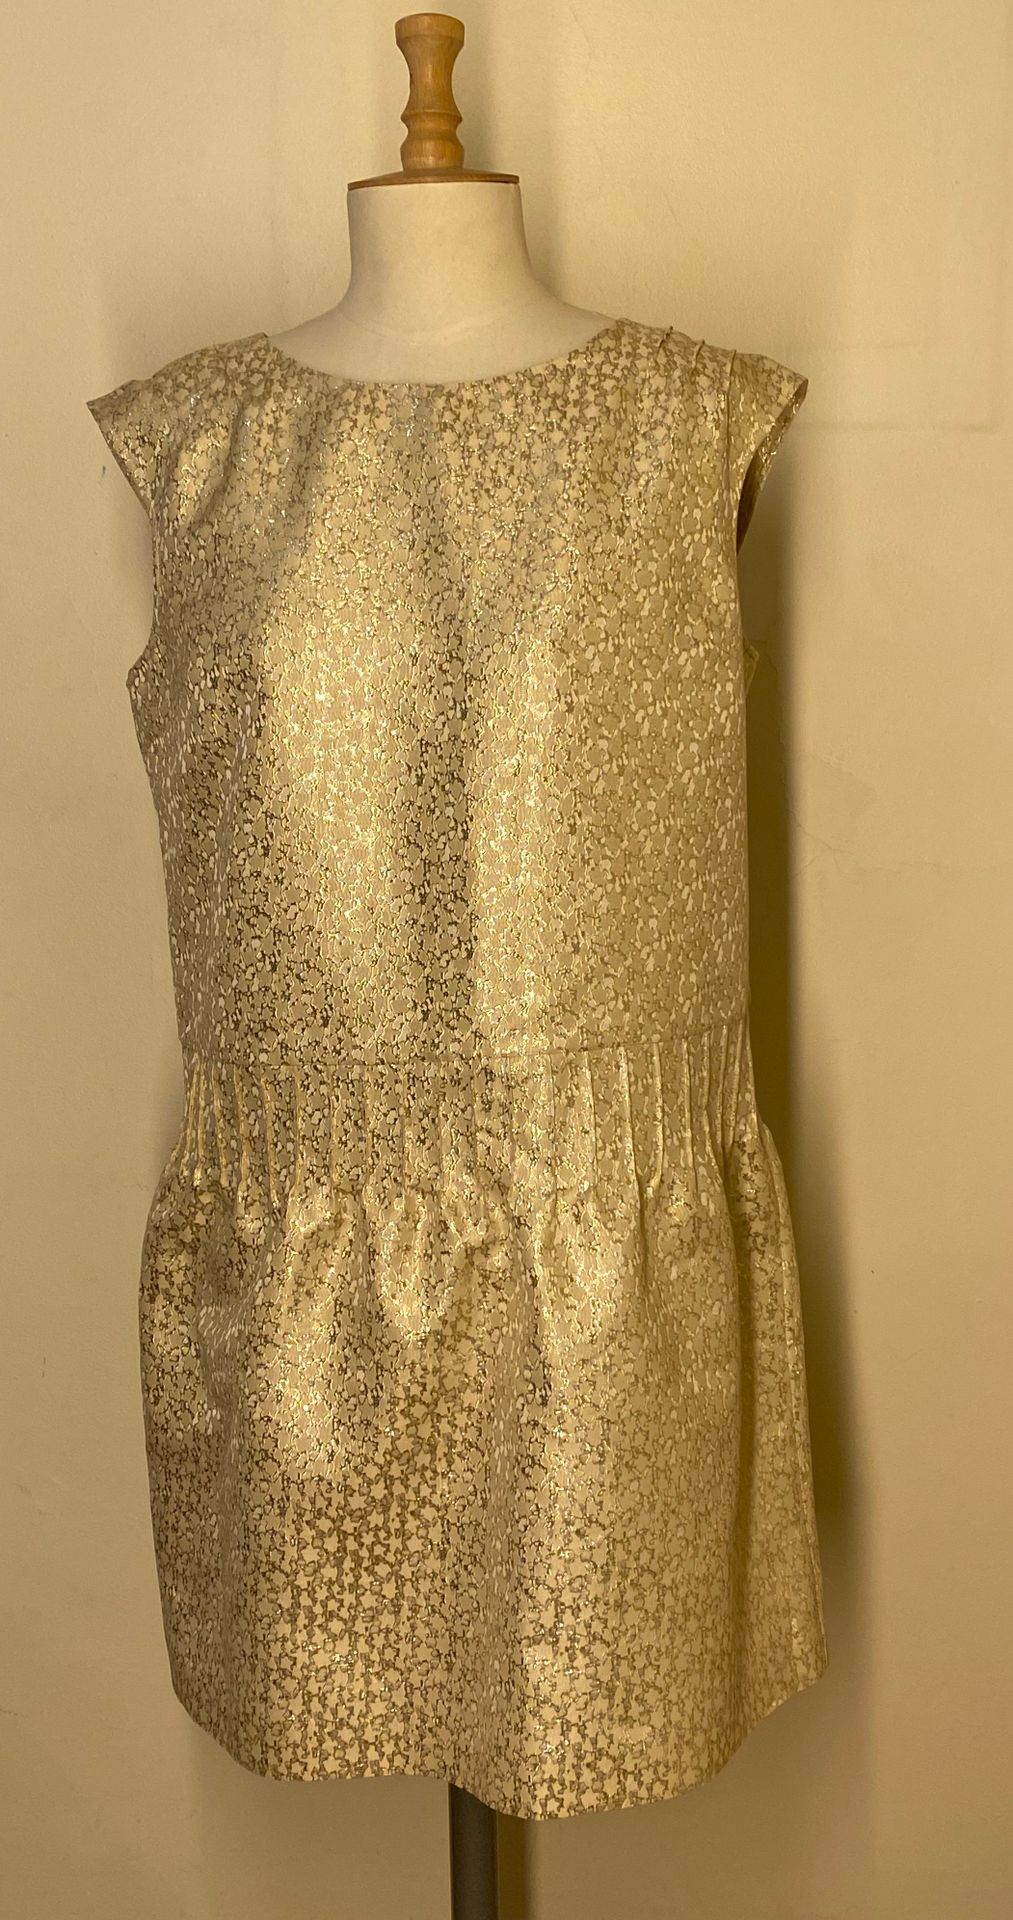 Null A.P.C rue Madame Paris

Fabric dress with golden decoration. Size L

(Good &hellip;